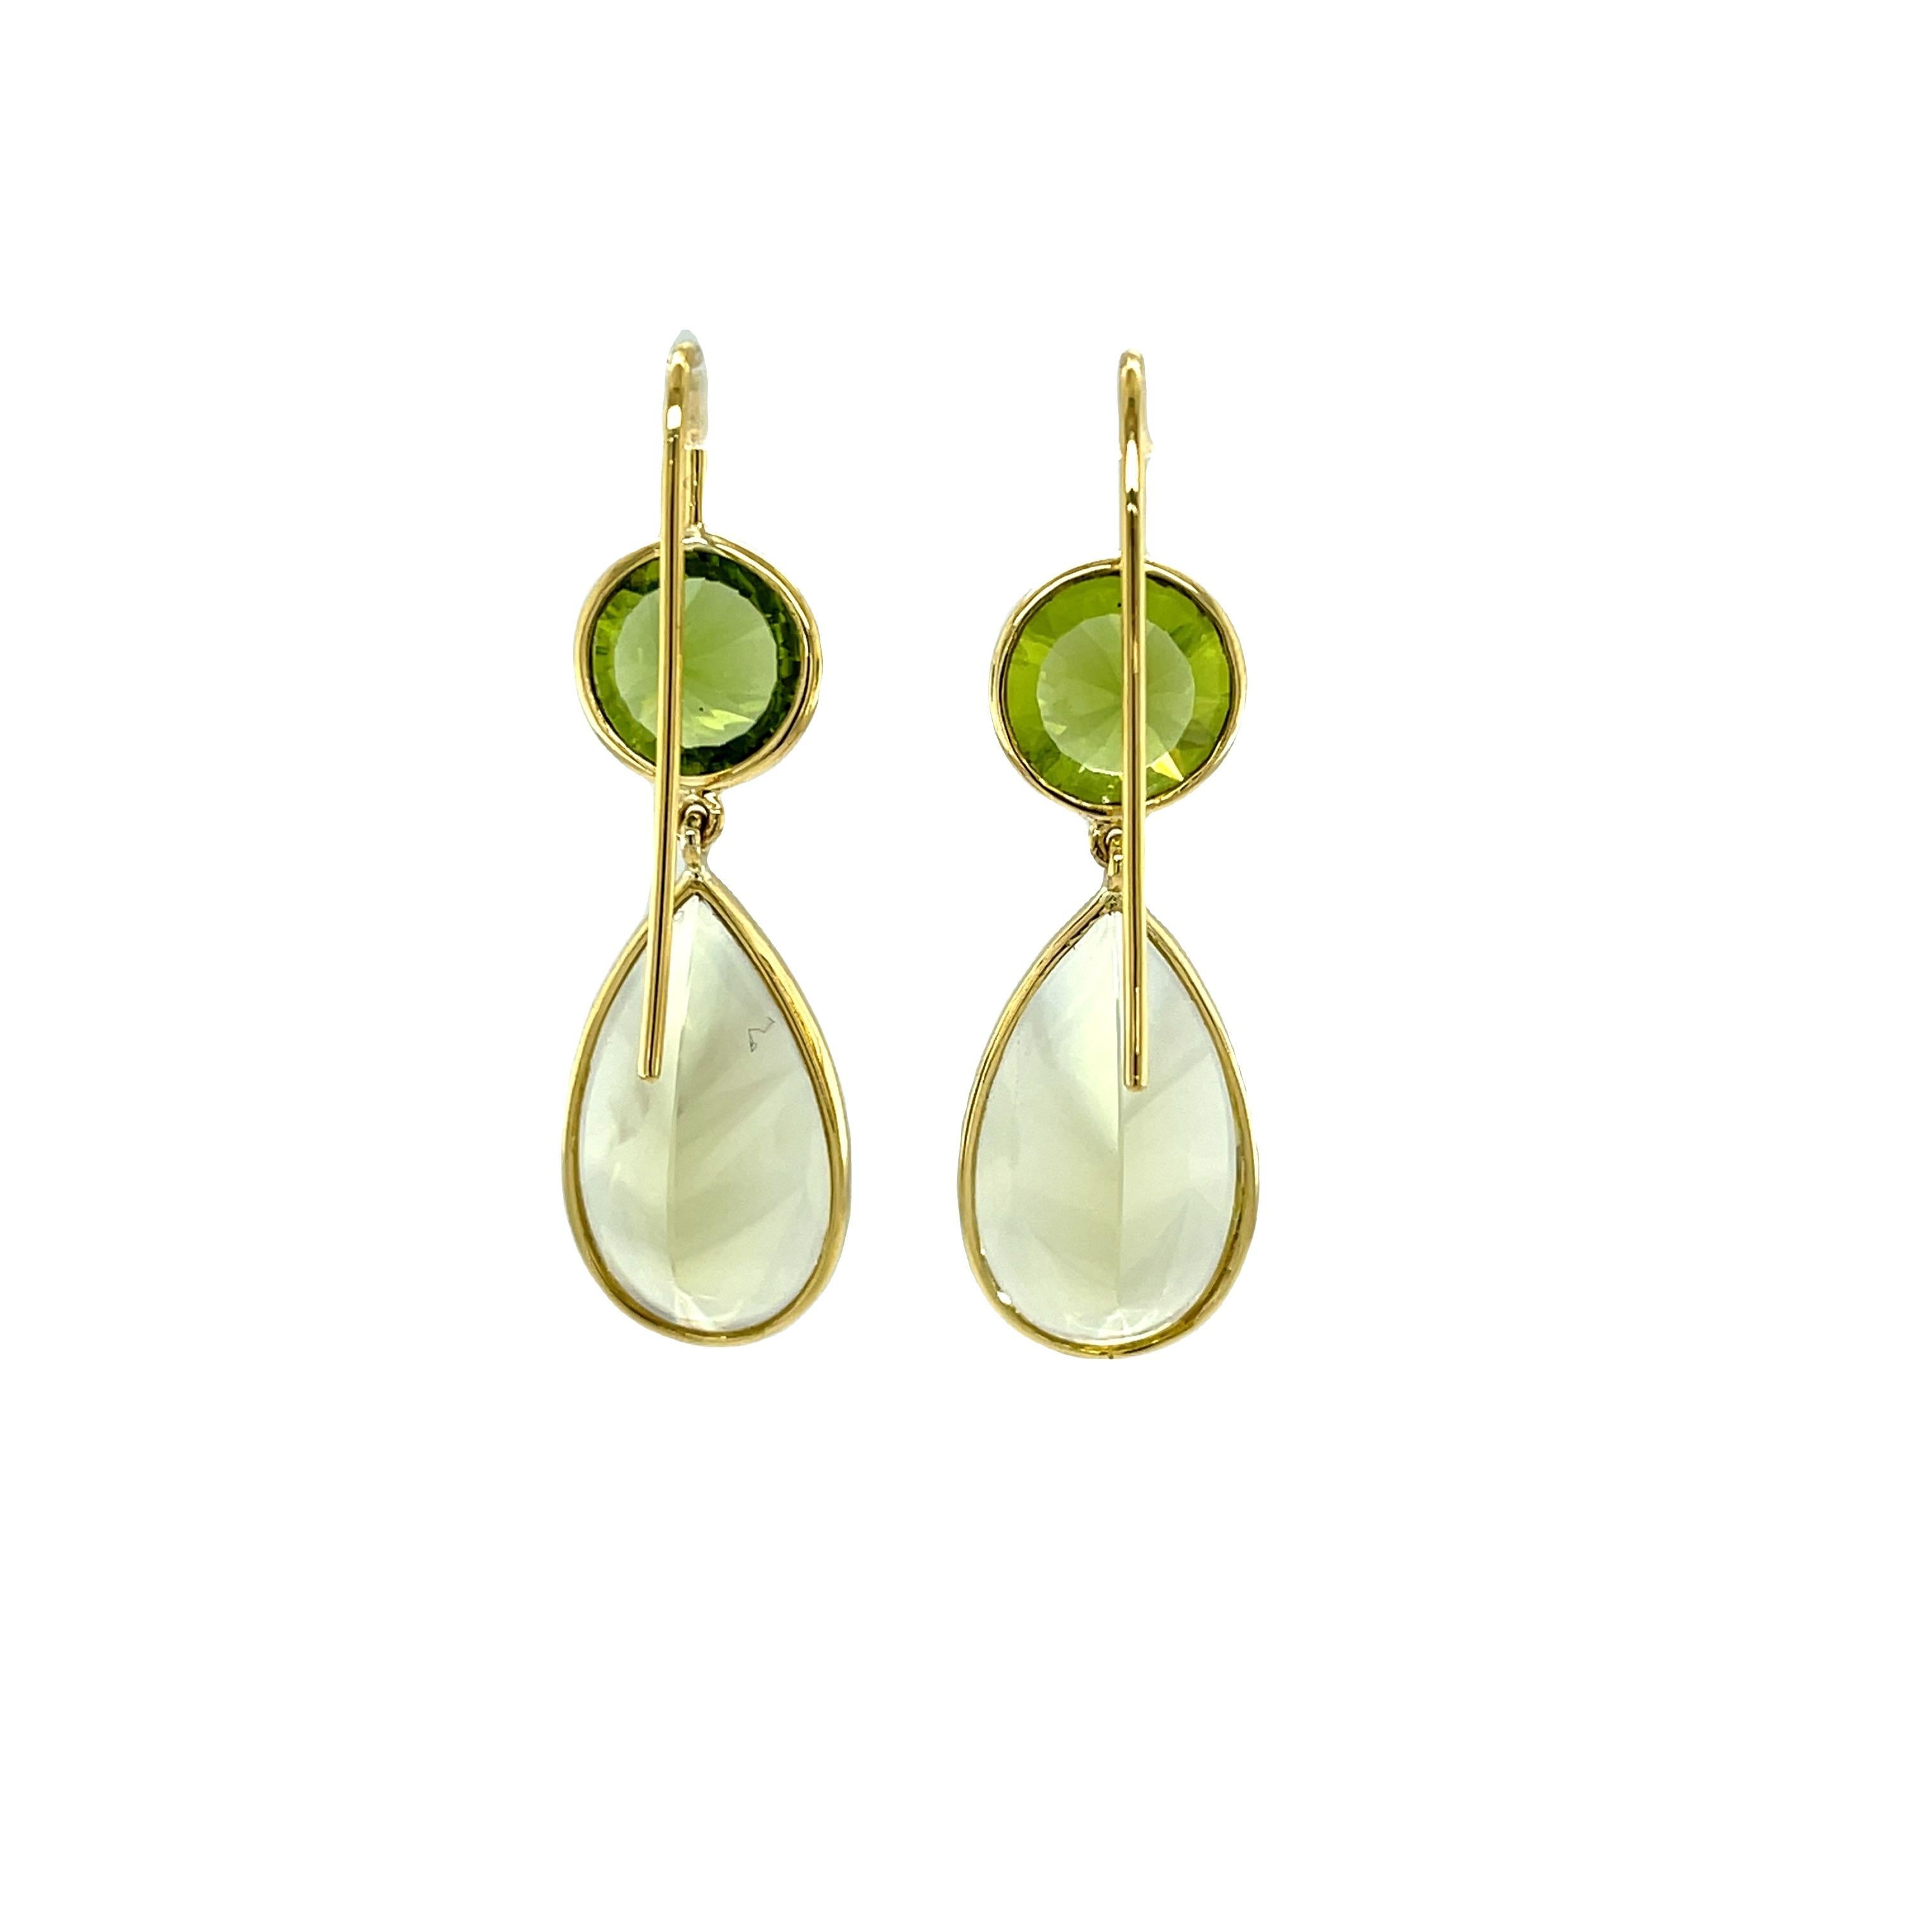 Fantasy Cut Citrine, Peridot Dangle Earrings in Yellow Gold, 5.53 Carats Total In New Condition For Sale In Los Angeles, CA